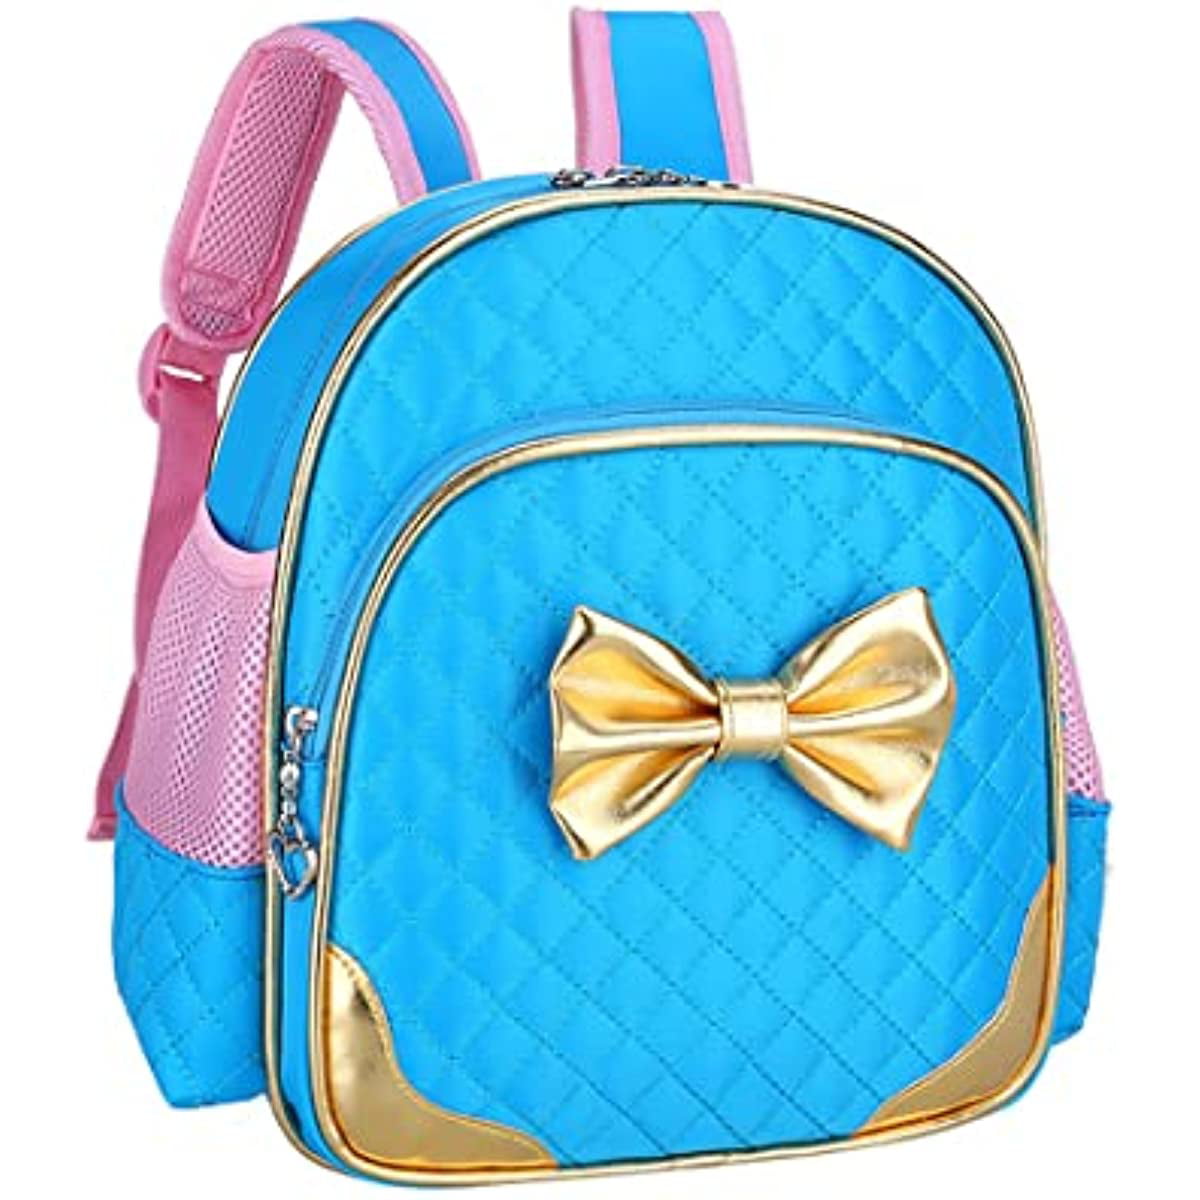 Children's backpack, children's backpack cute bow backpack suitable for ...